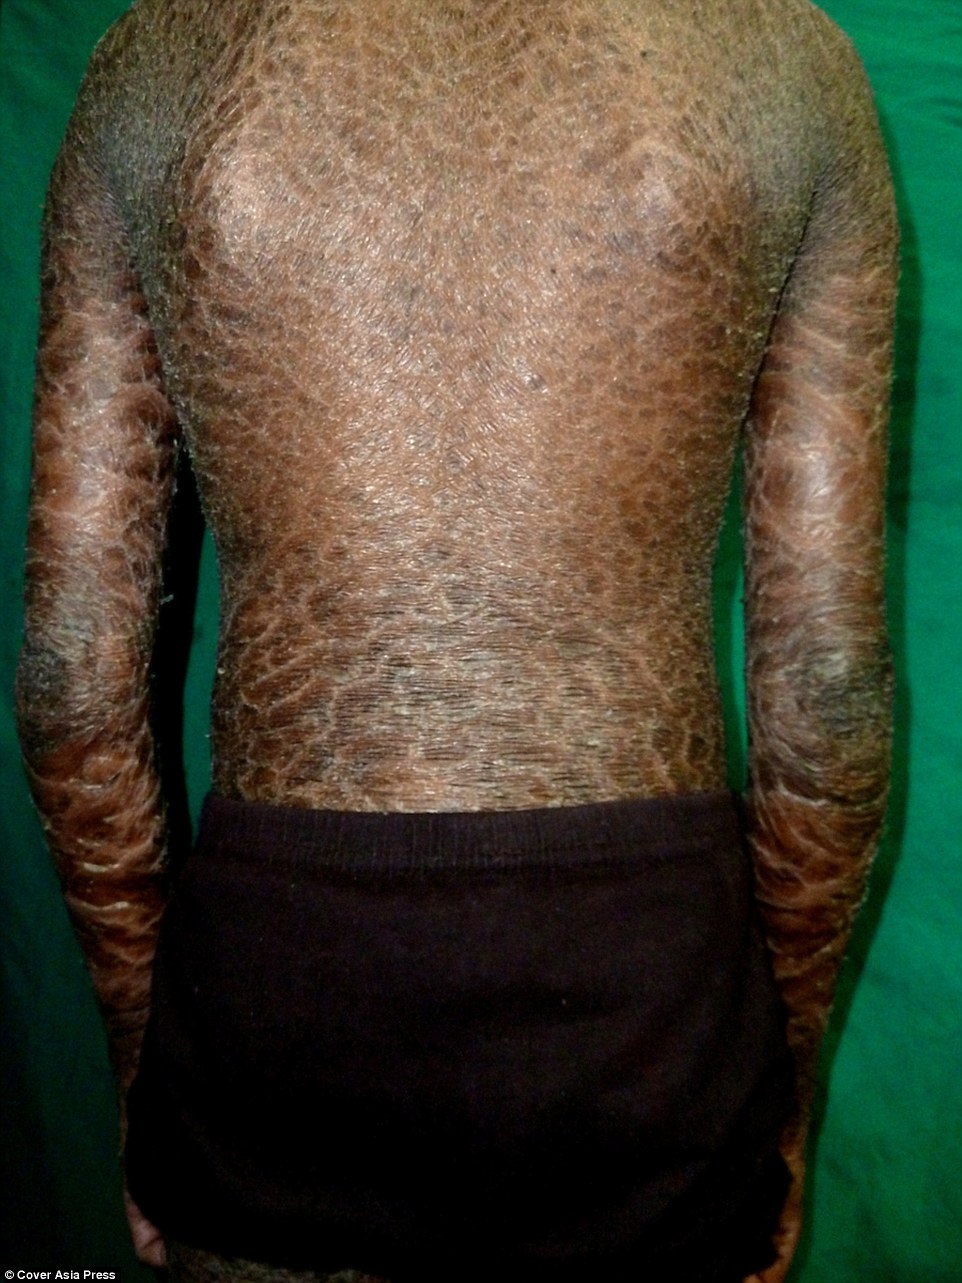 Effiong Eton Rare Skin Disease Leaves Brother And Sister With Scales All Over Their Bodies